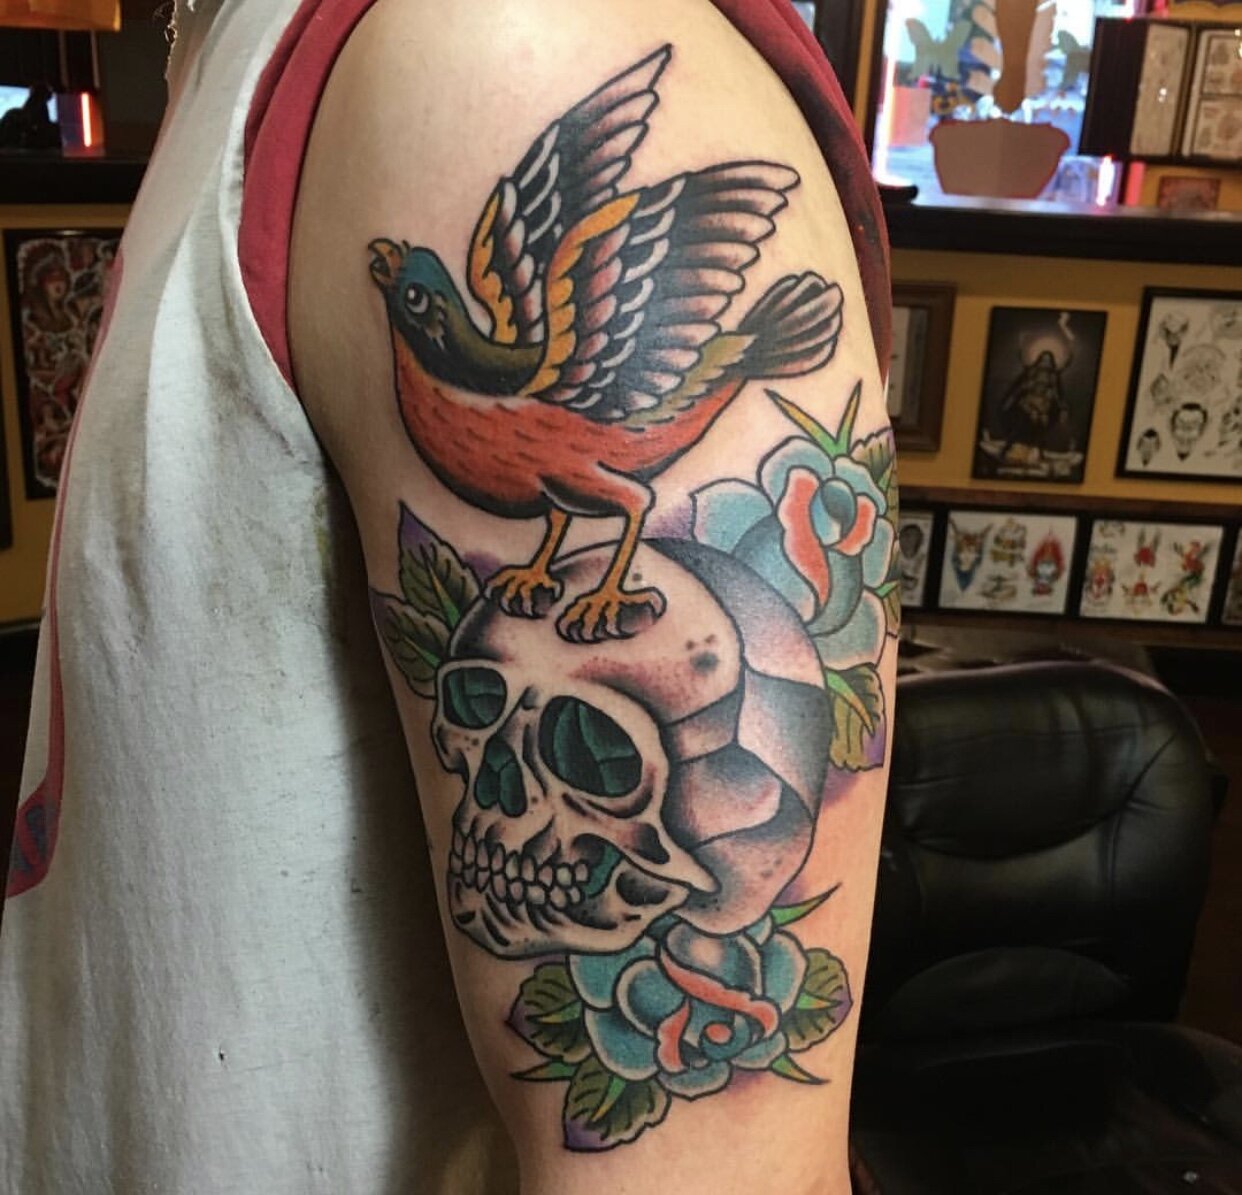 Skull, bird and roses tattoo in traditional color by Andrew Patch at Southern Star Tattoo in Atlanta, Georgia.